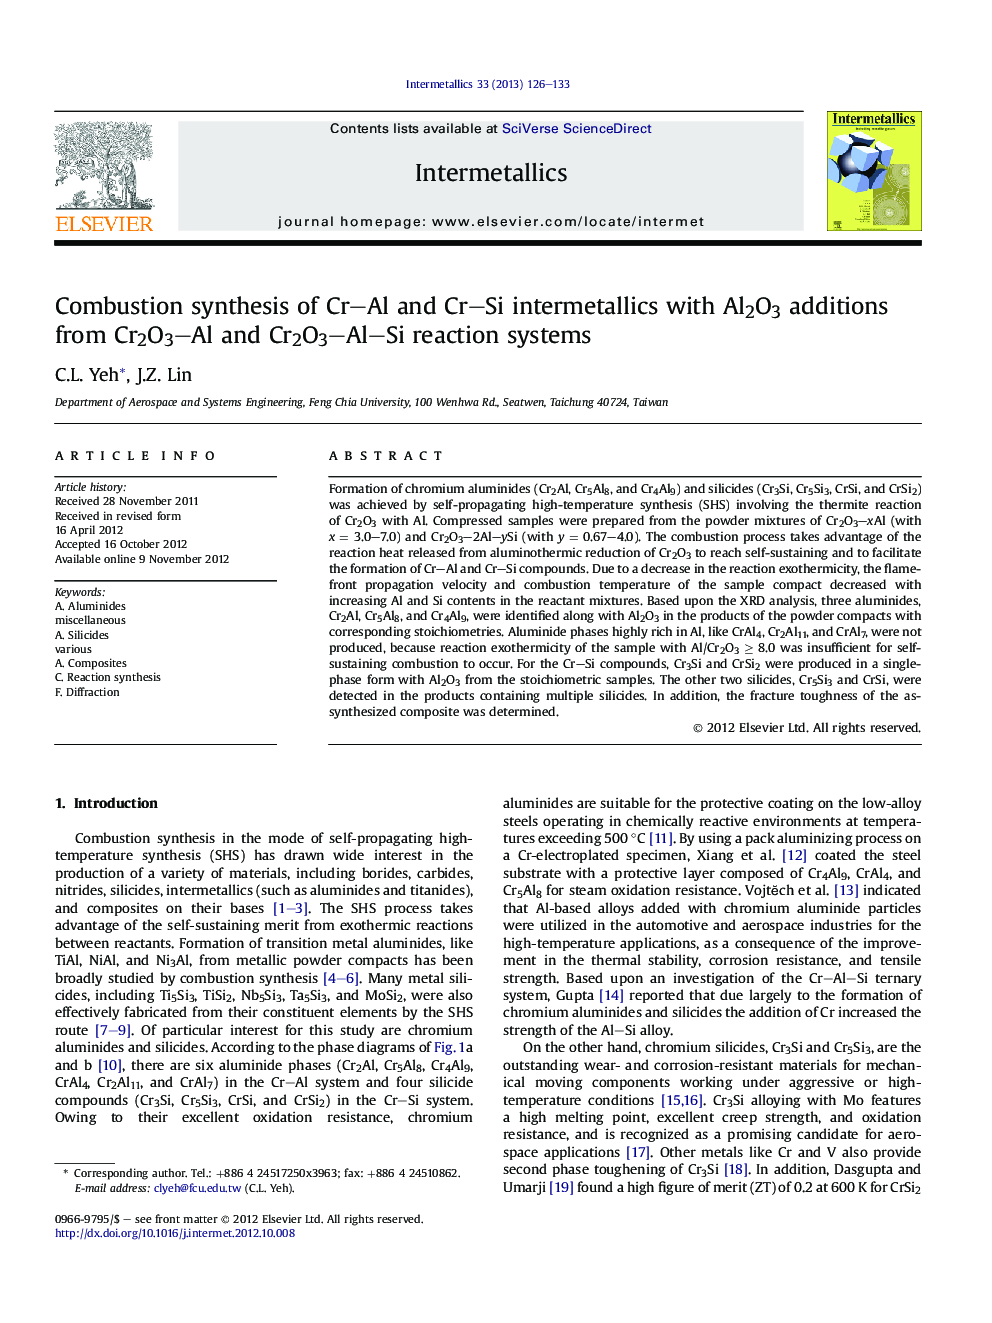 Combustion synthesis of Cr–Al and Cr–Si intermetallics with Al2O3 additions from Cr2O3–Al and Cr2O3–Al–Si reaction systems